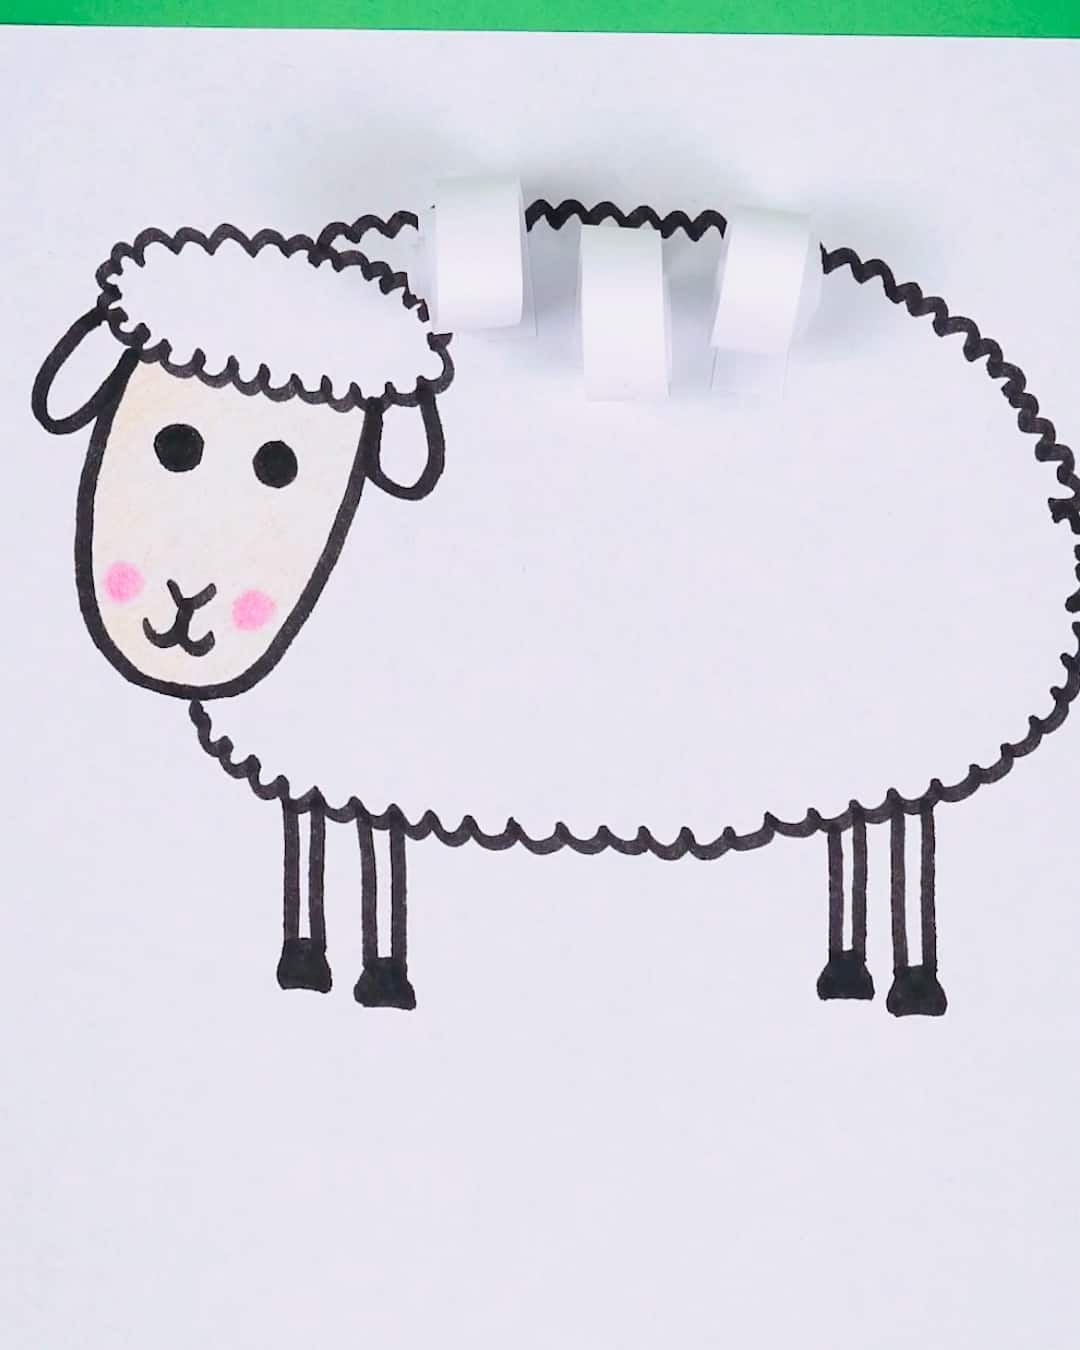 Sheep Activity For Kids